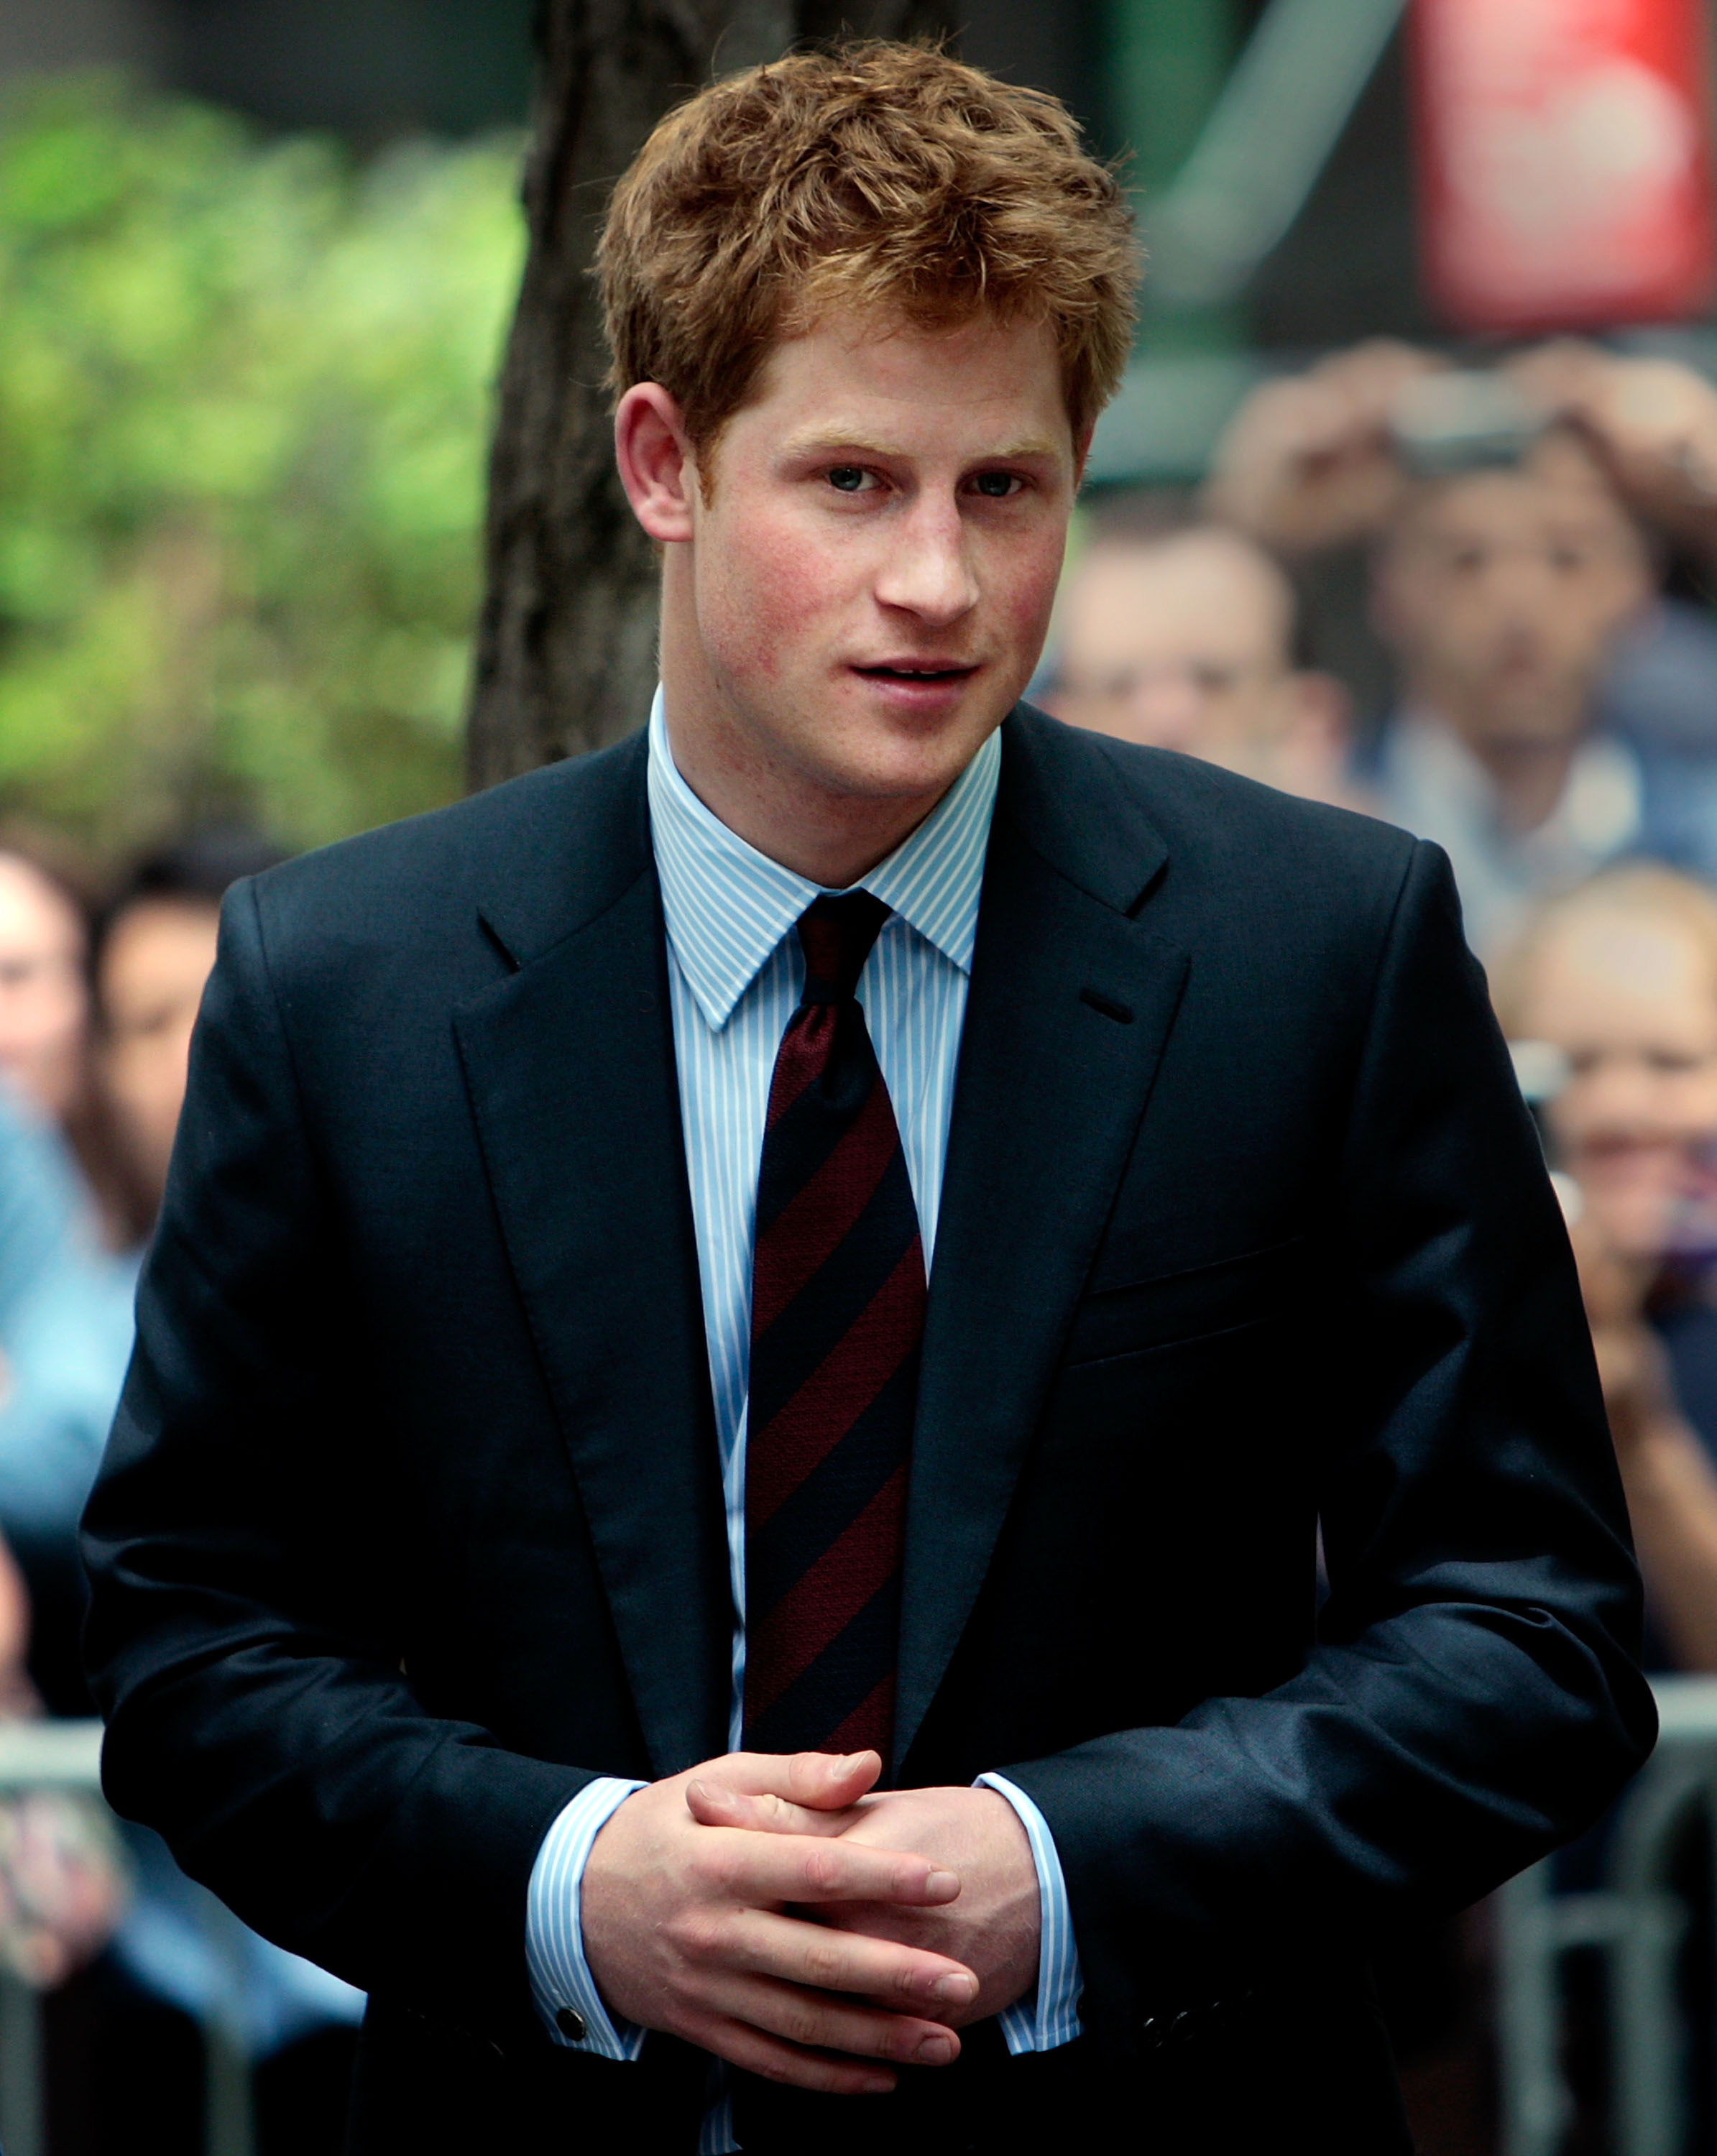 Prince Harry: The hottest photos of the young royal | Gallery ...